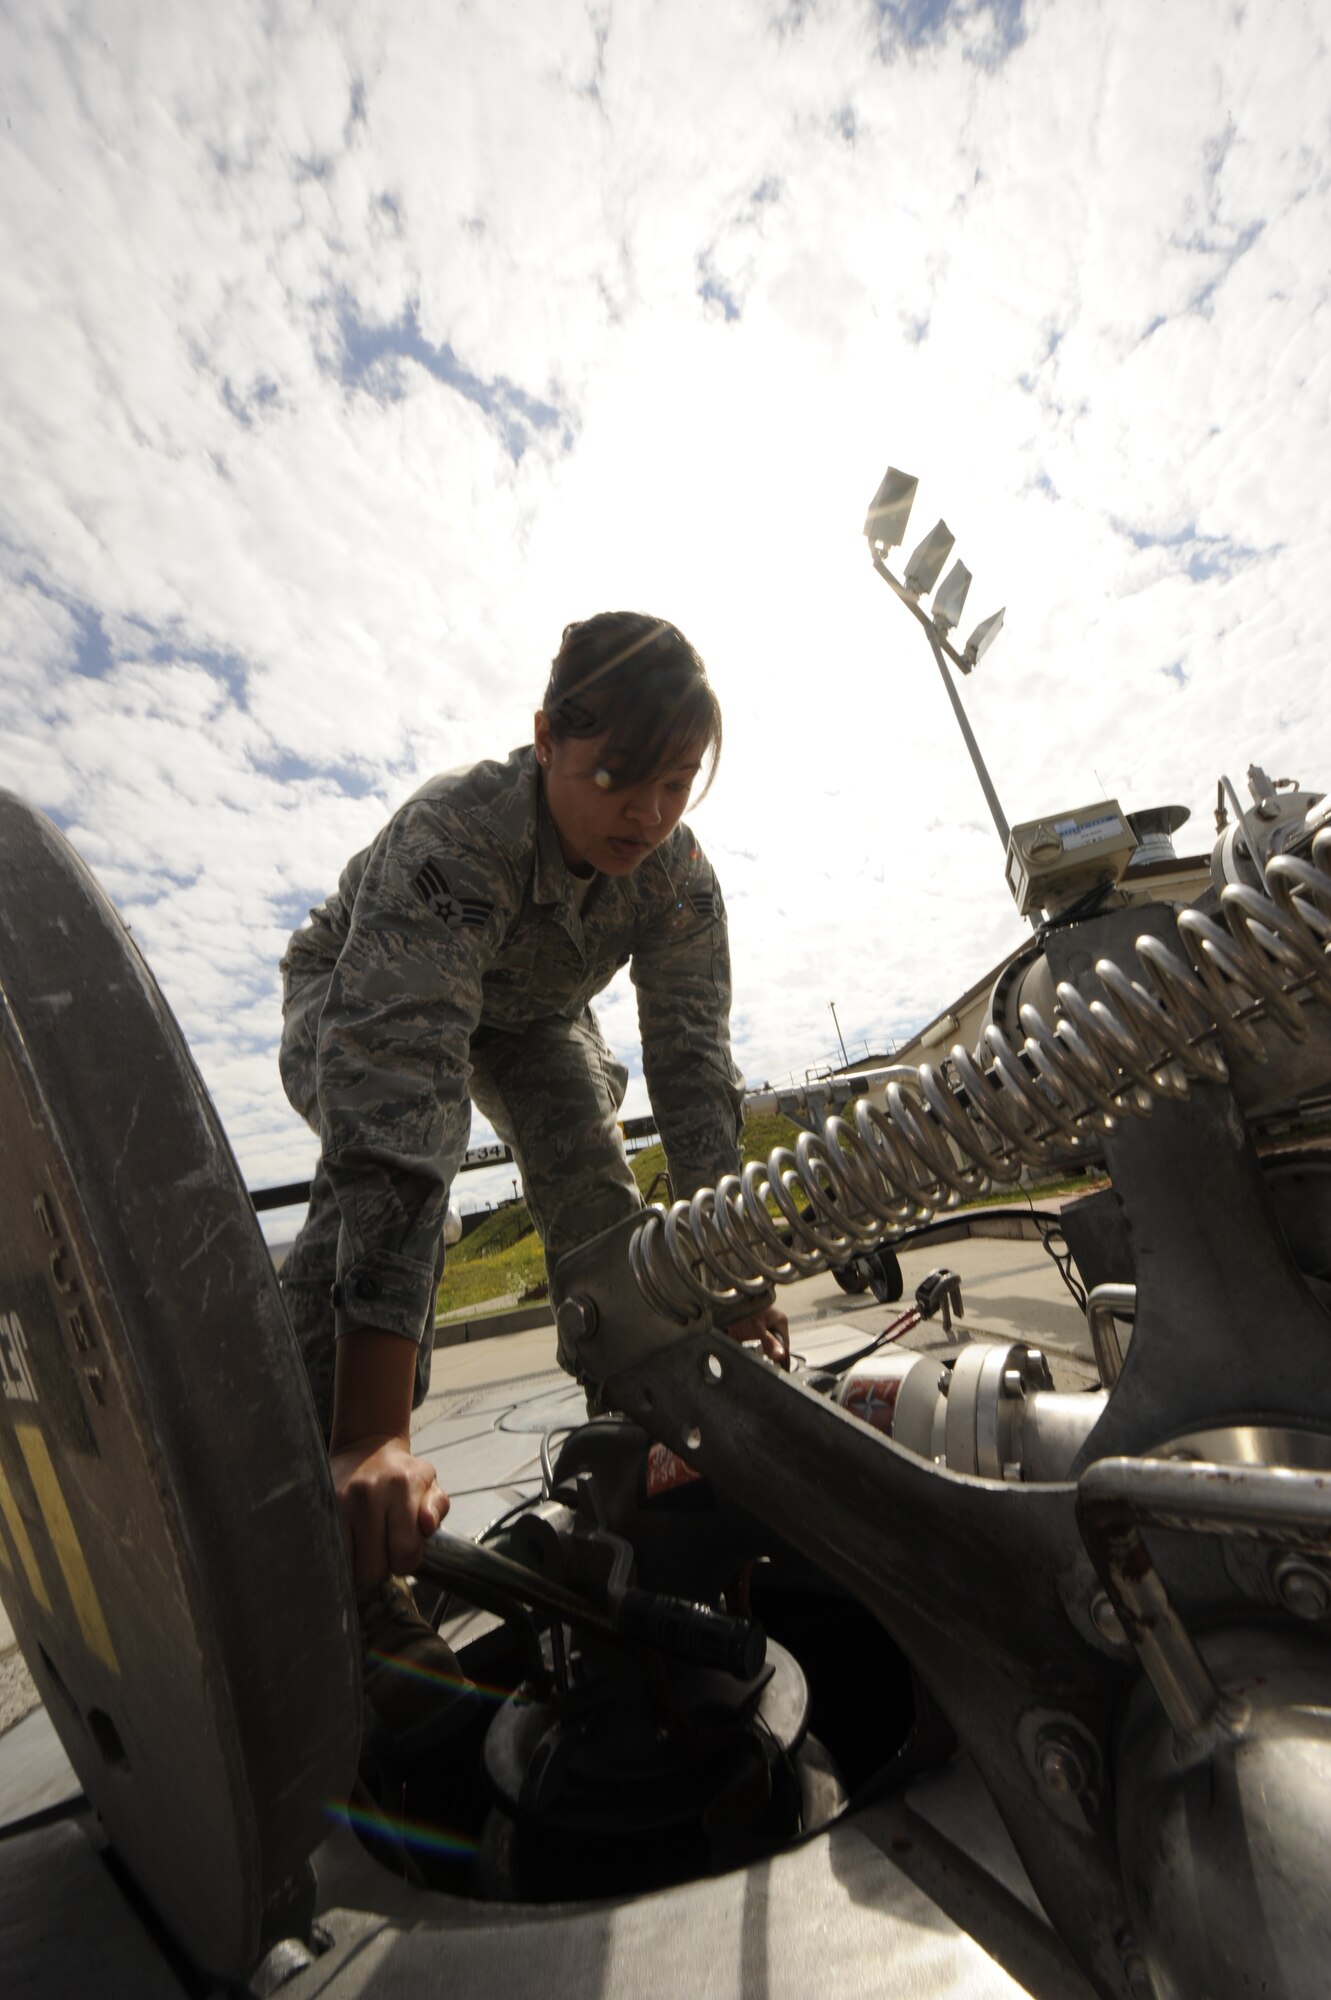 Senior Airman Janine Trammel, 86th Logistics Readiness Squadron fuels technician, hooks up a moose head to a fuels pit to prepare for a refuel on Ramstein Air Base, Germany, July 10, 2012. Fuels help support the mission by continuously providing quality grade jet fuel. (U.S. Air Force photo/ Senior Airman Aaron-Forrest Wainwright)